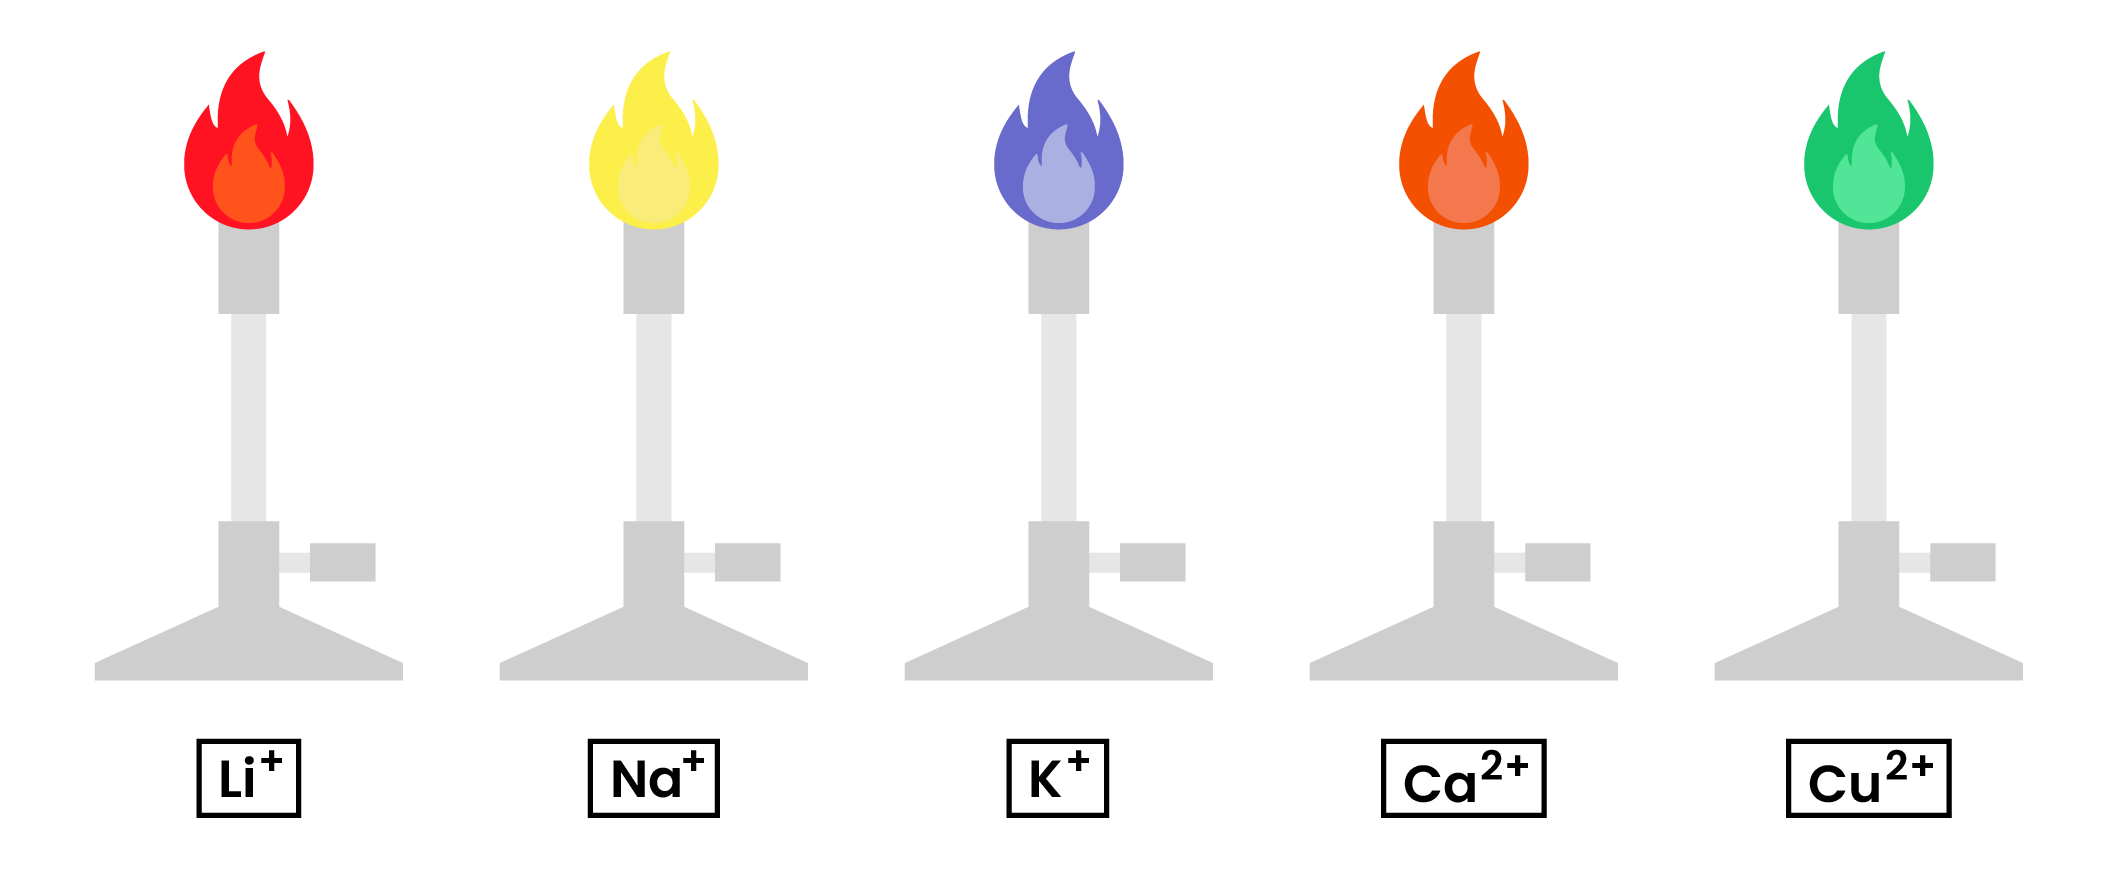 edexcel_igcse_chemistry_topic 17_chemical tests_002_flame test for cations colours